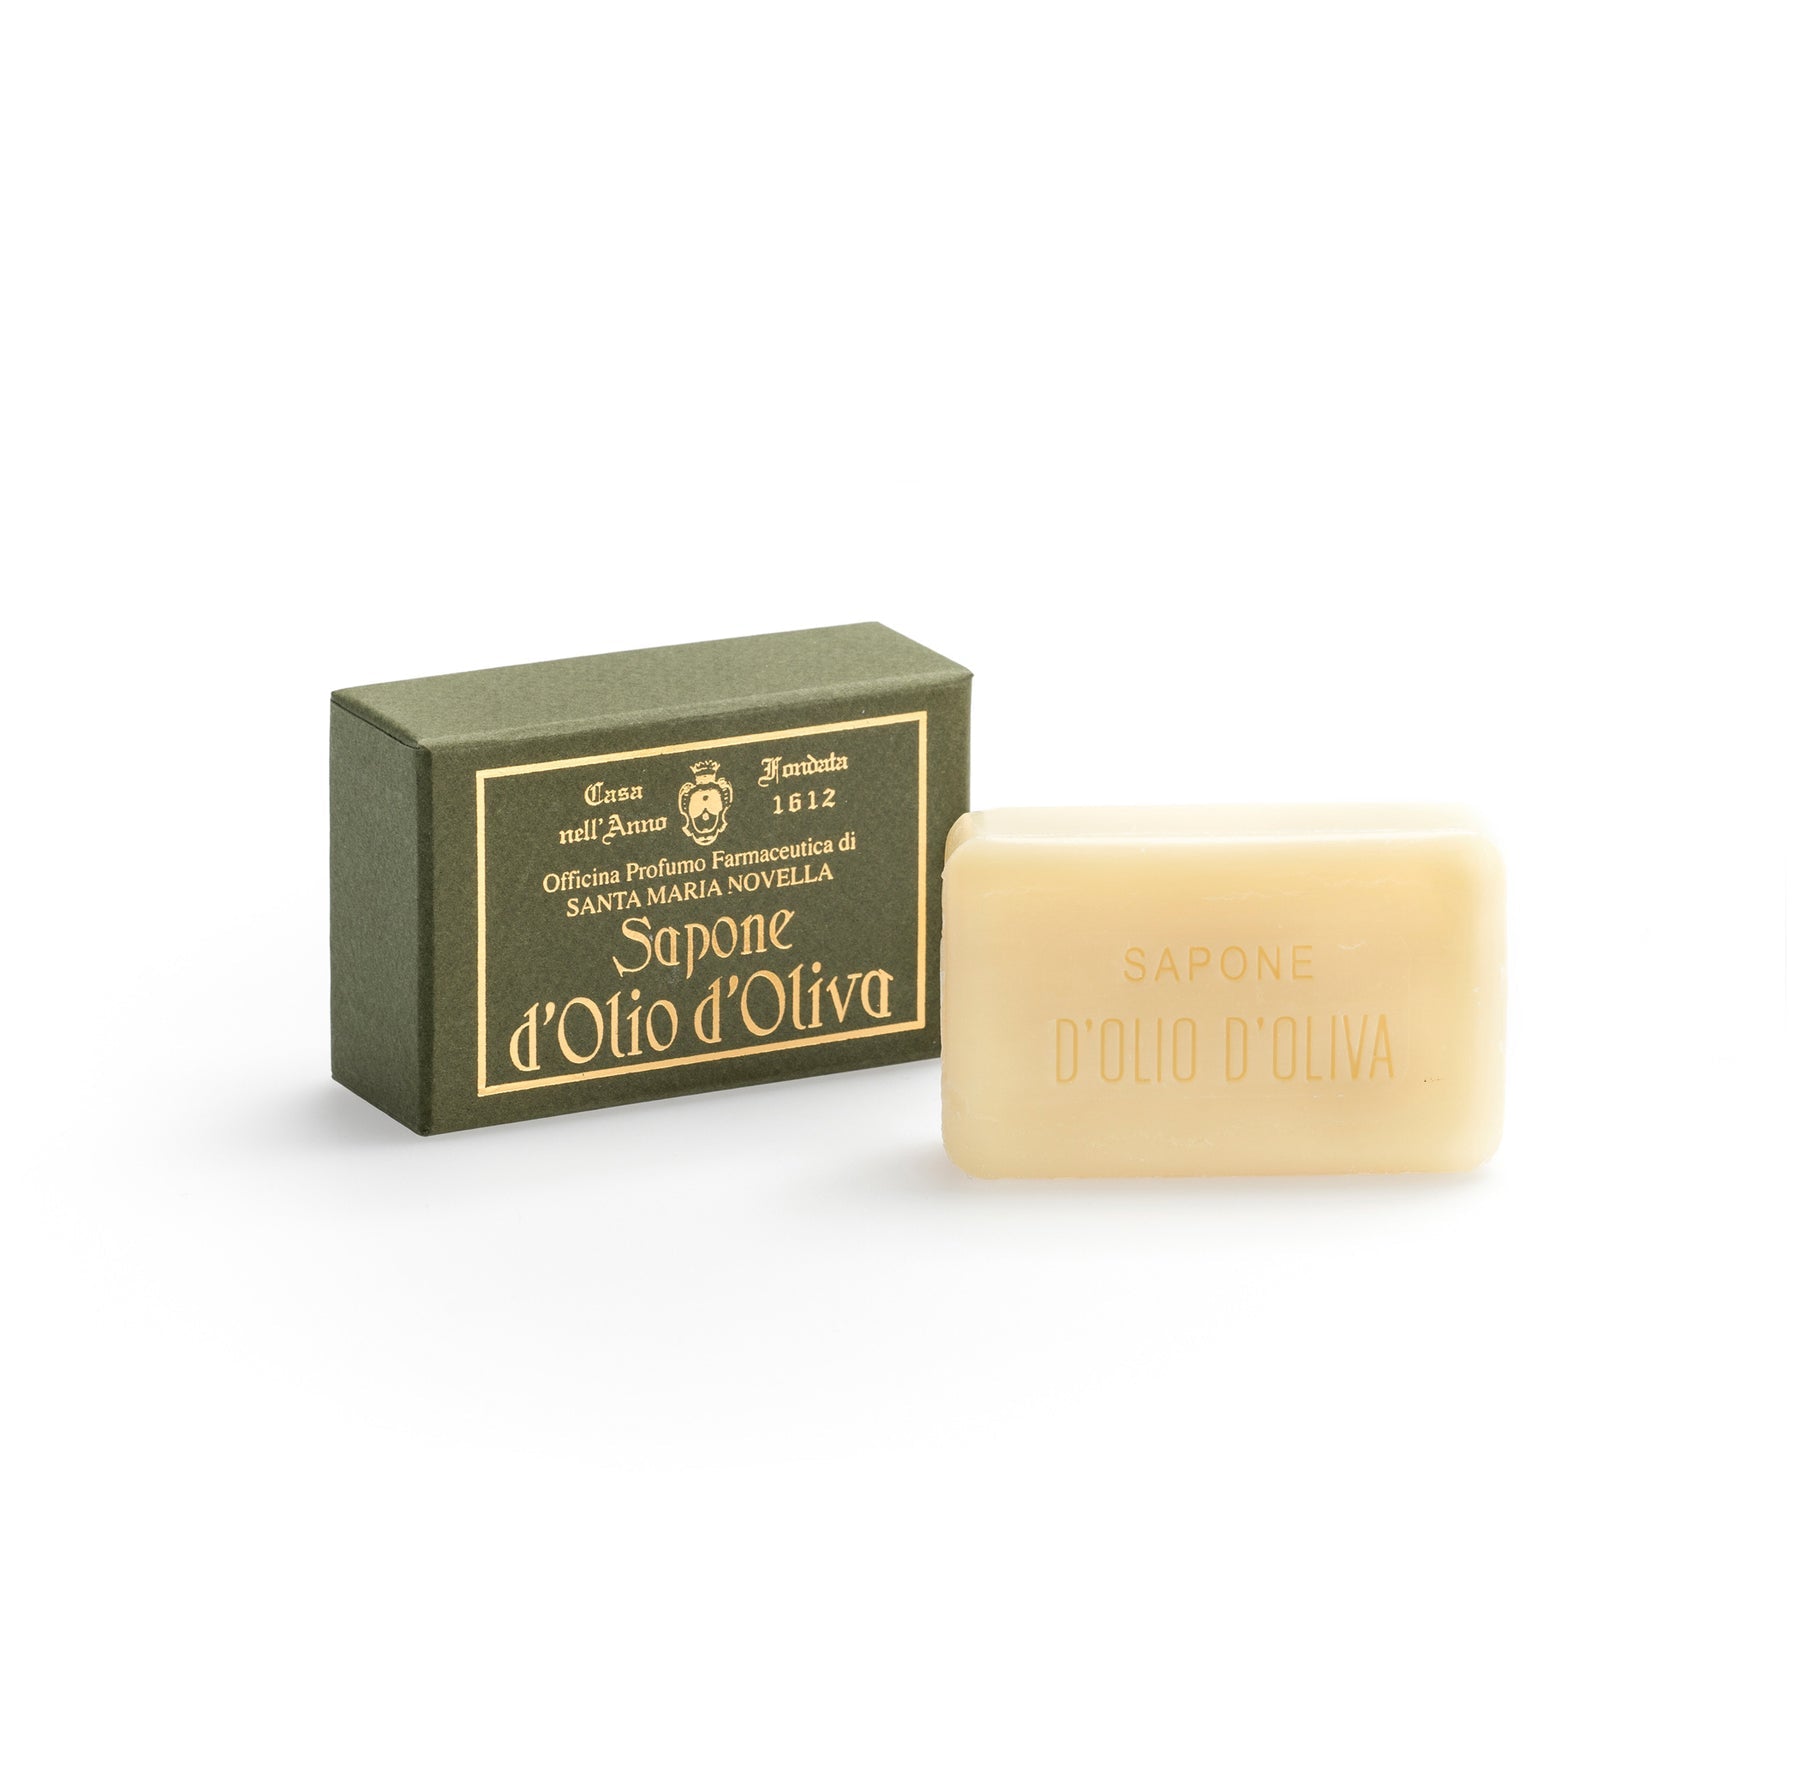 Sapone d'Olio d'Oliva (Olive Oil Soap). 250gr